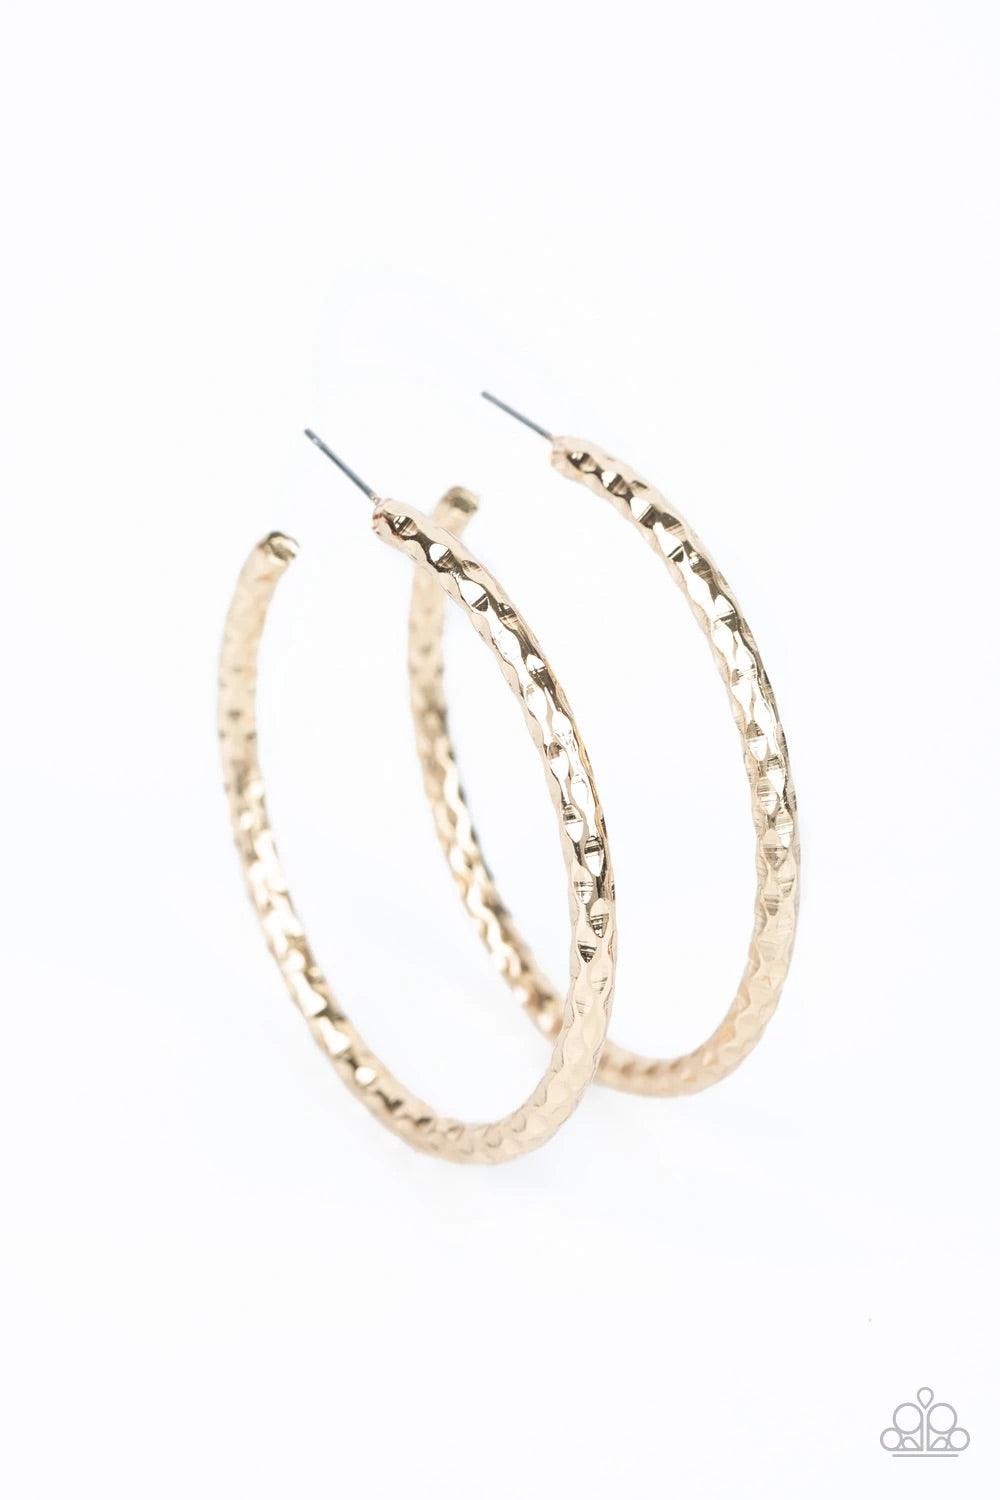 Paparazzi Accessories Urban Upgrade - Gold Hammered in blinding shimmer, a thick gold hoop curls around the ear for an edgy, urban look. Earring attaches to a standard post fitting. Hoop measures approximately 2" in diameter. Sold as one pair of hoop earr